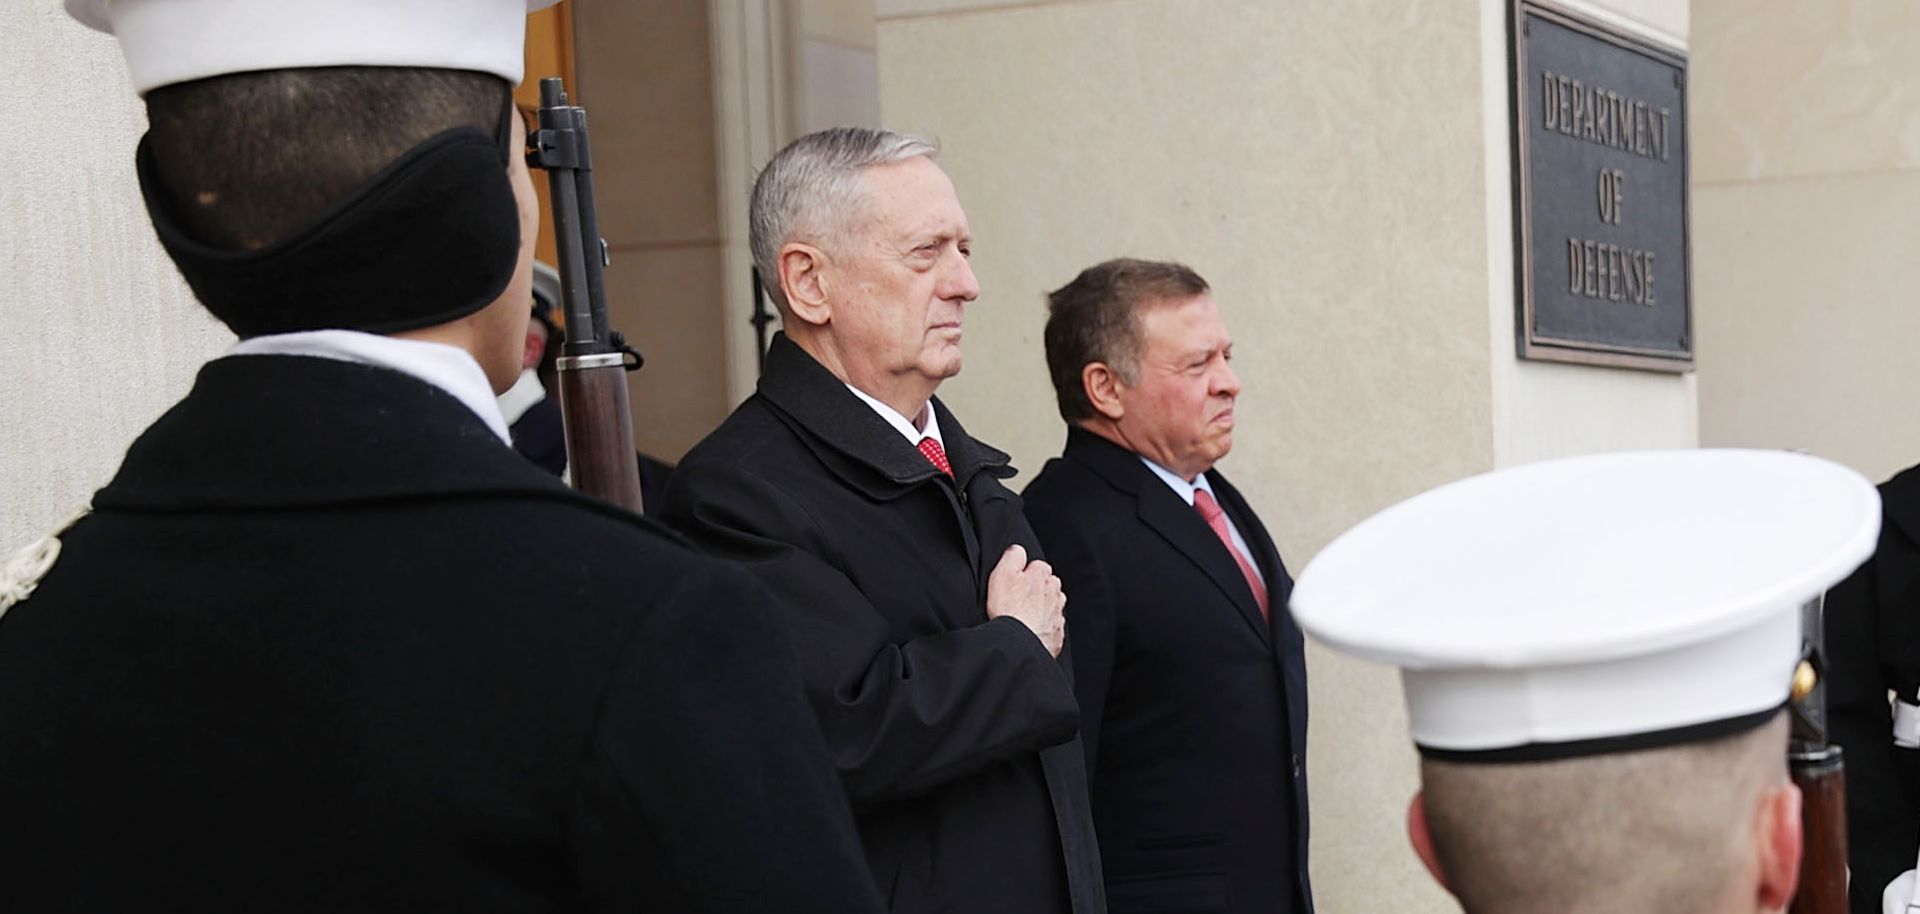 U.S. Secretary of Defense James Mattis (L), with Jordanian King Abdullah in a January ceremony. Mattis is dedicated to continue the fight against terrorism.